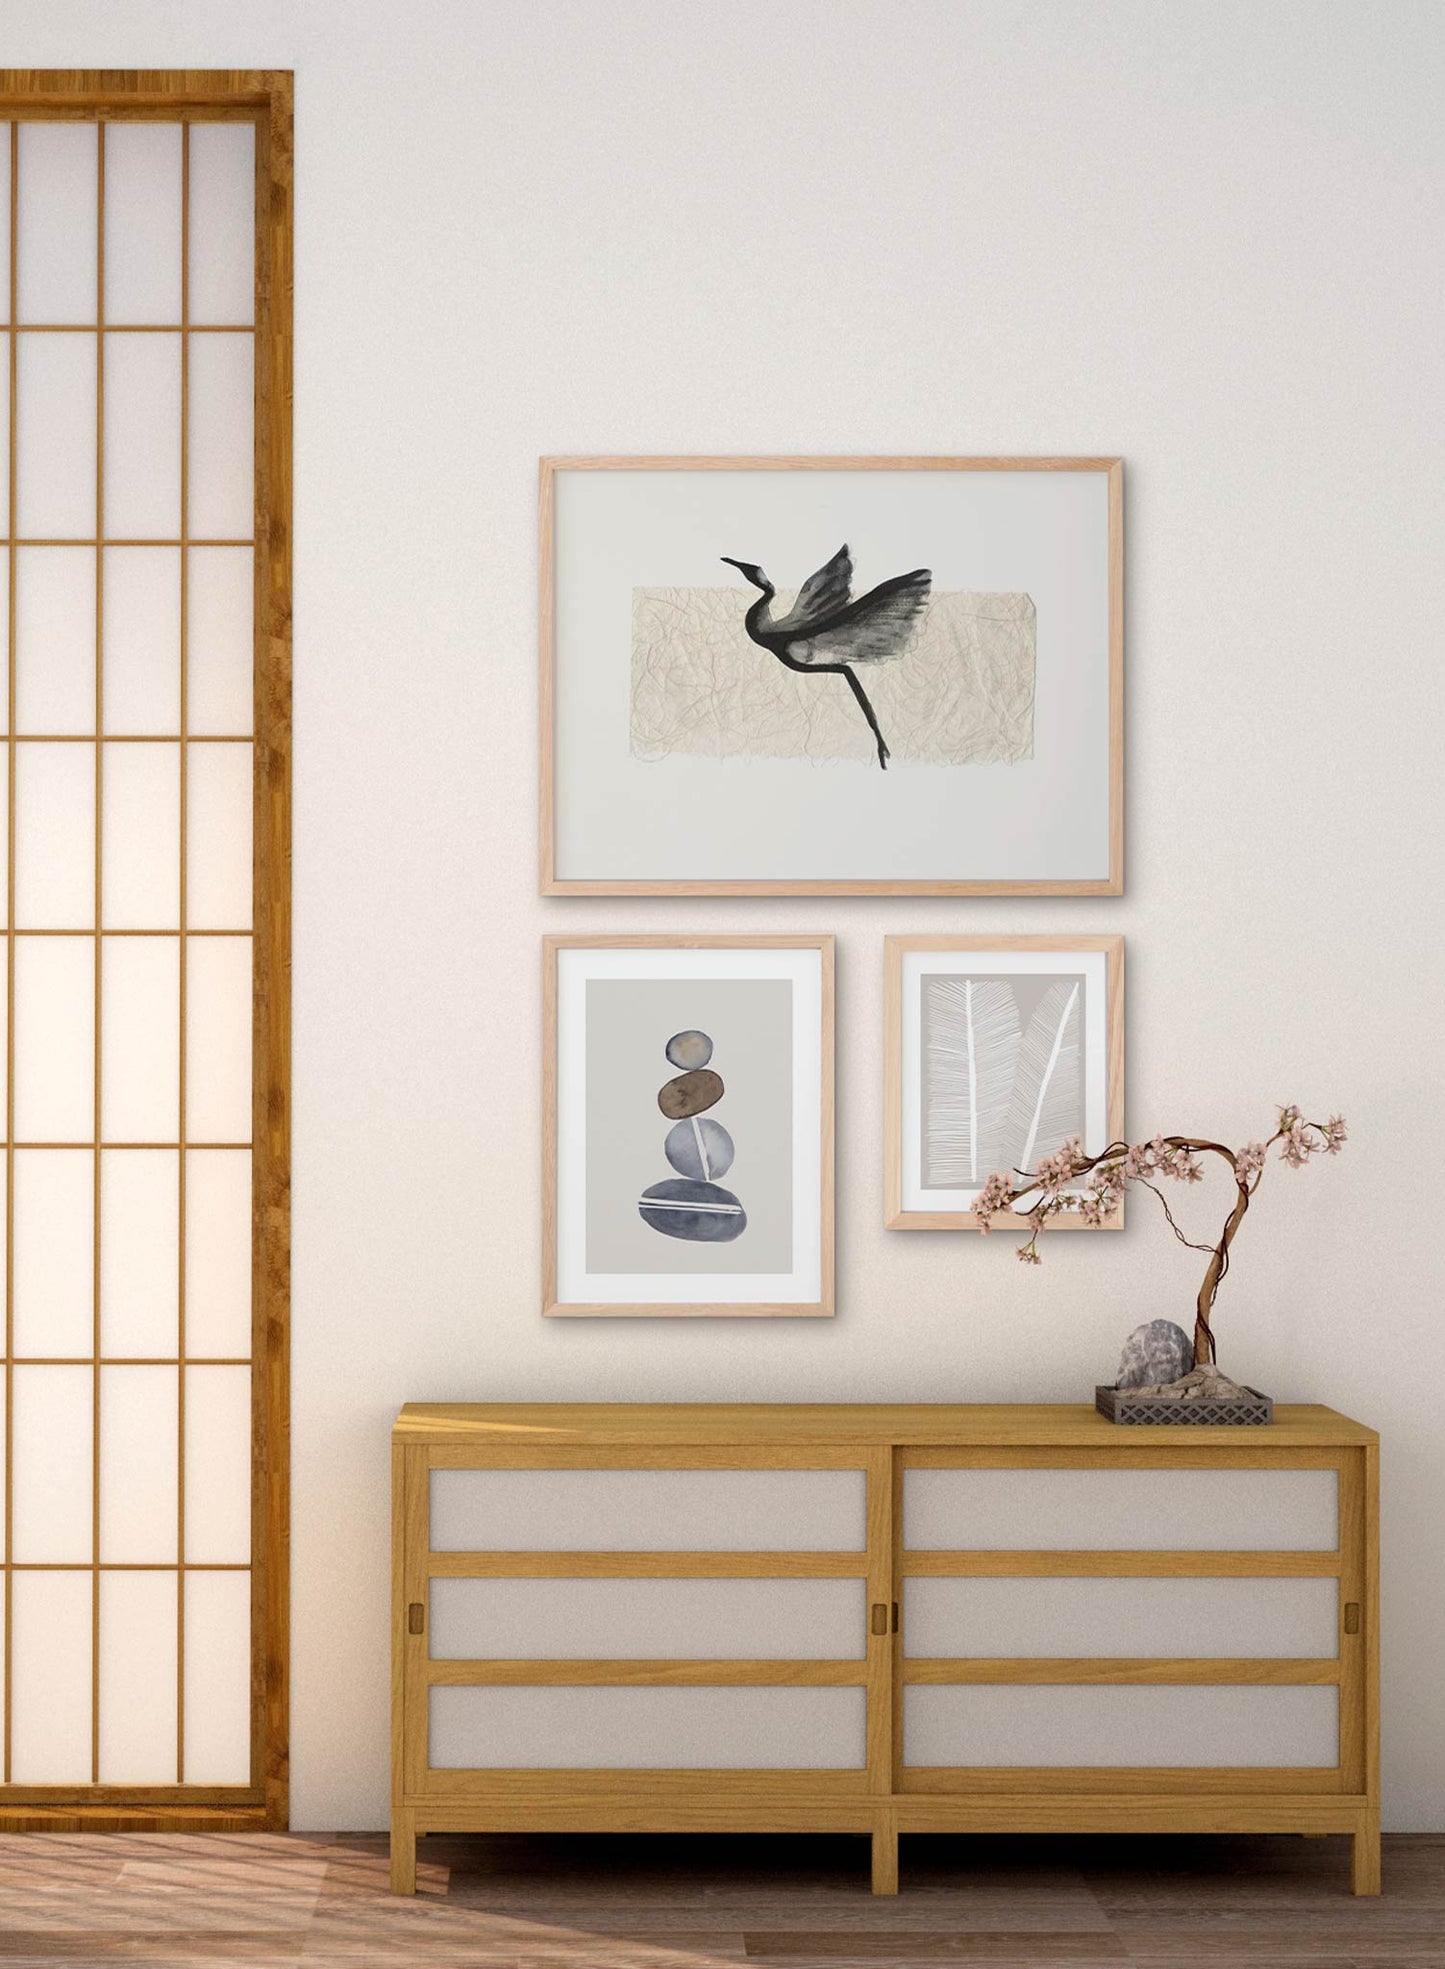 Ascend is a minimalist illustration by Opposite Wall of a majestic crane spreading its wings to fly out.